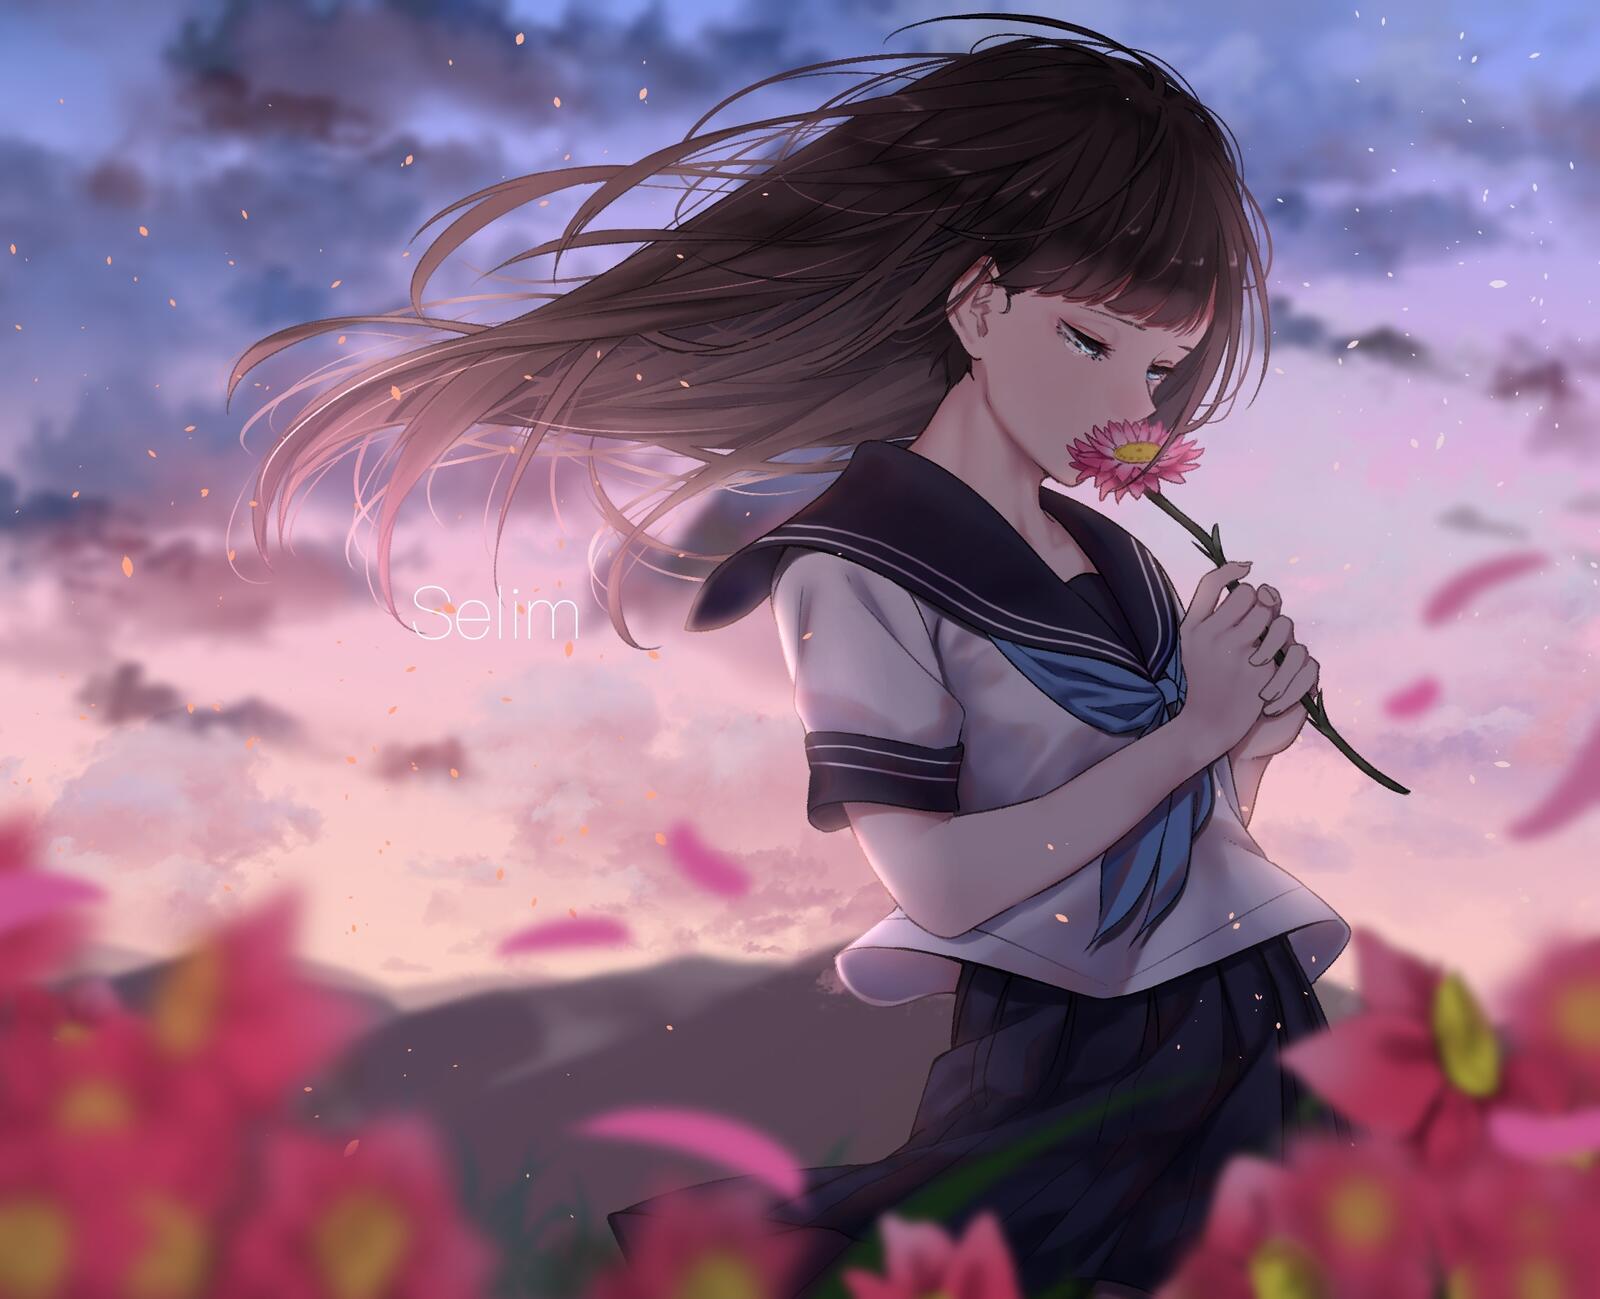 Wallpapers anime girl teary eyes sad expression on the desktop